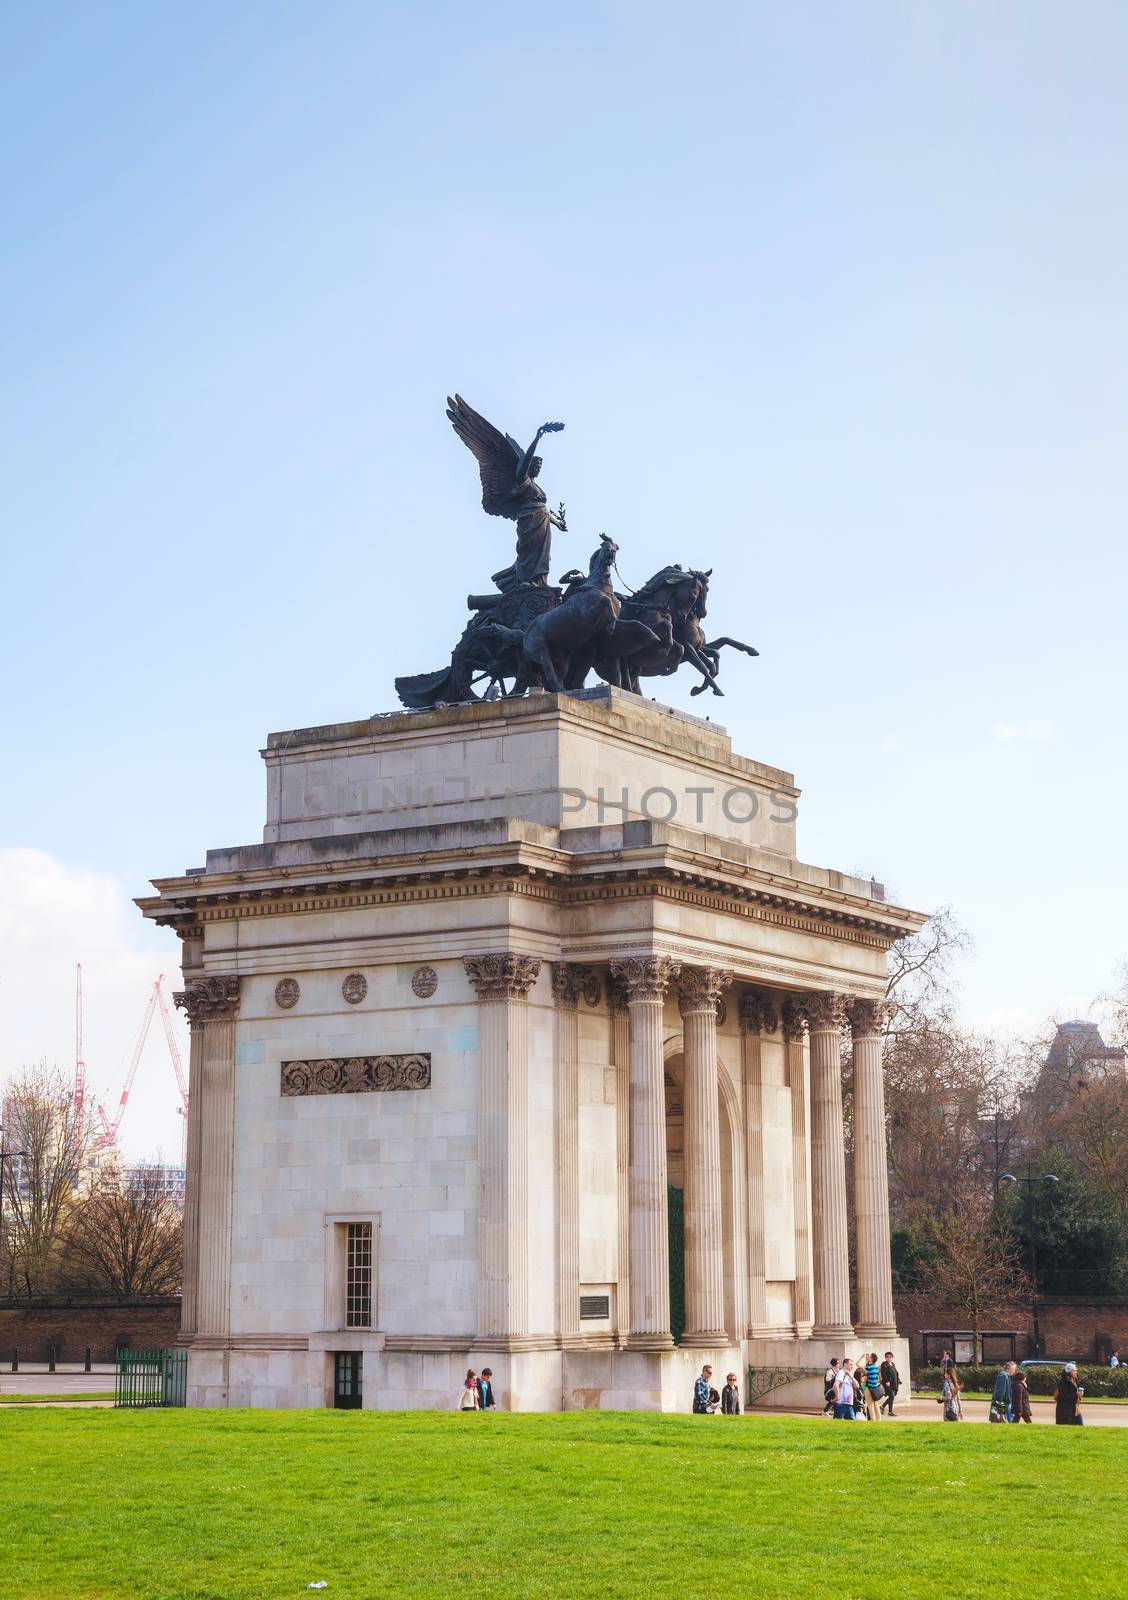 LONDON - APRIL 6: Wellington Arch monument with people on April 6, 2015 in London, UK. It's a triumphal arch located to the south of Hyde Park in central London and at the western corner of Green Park